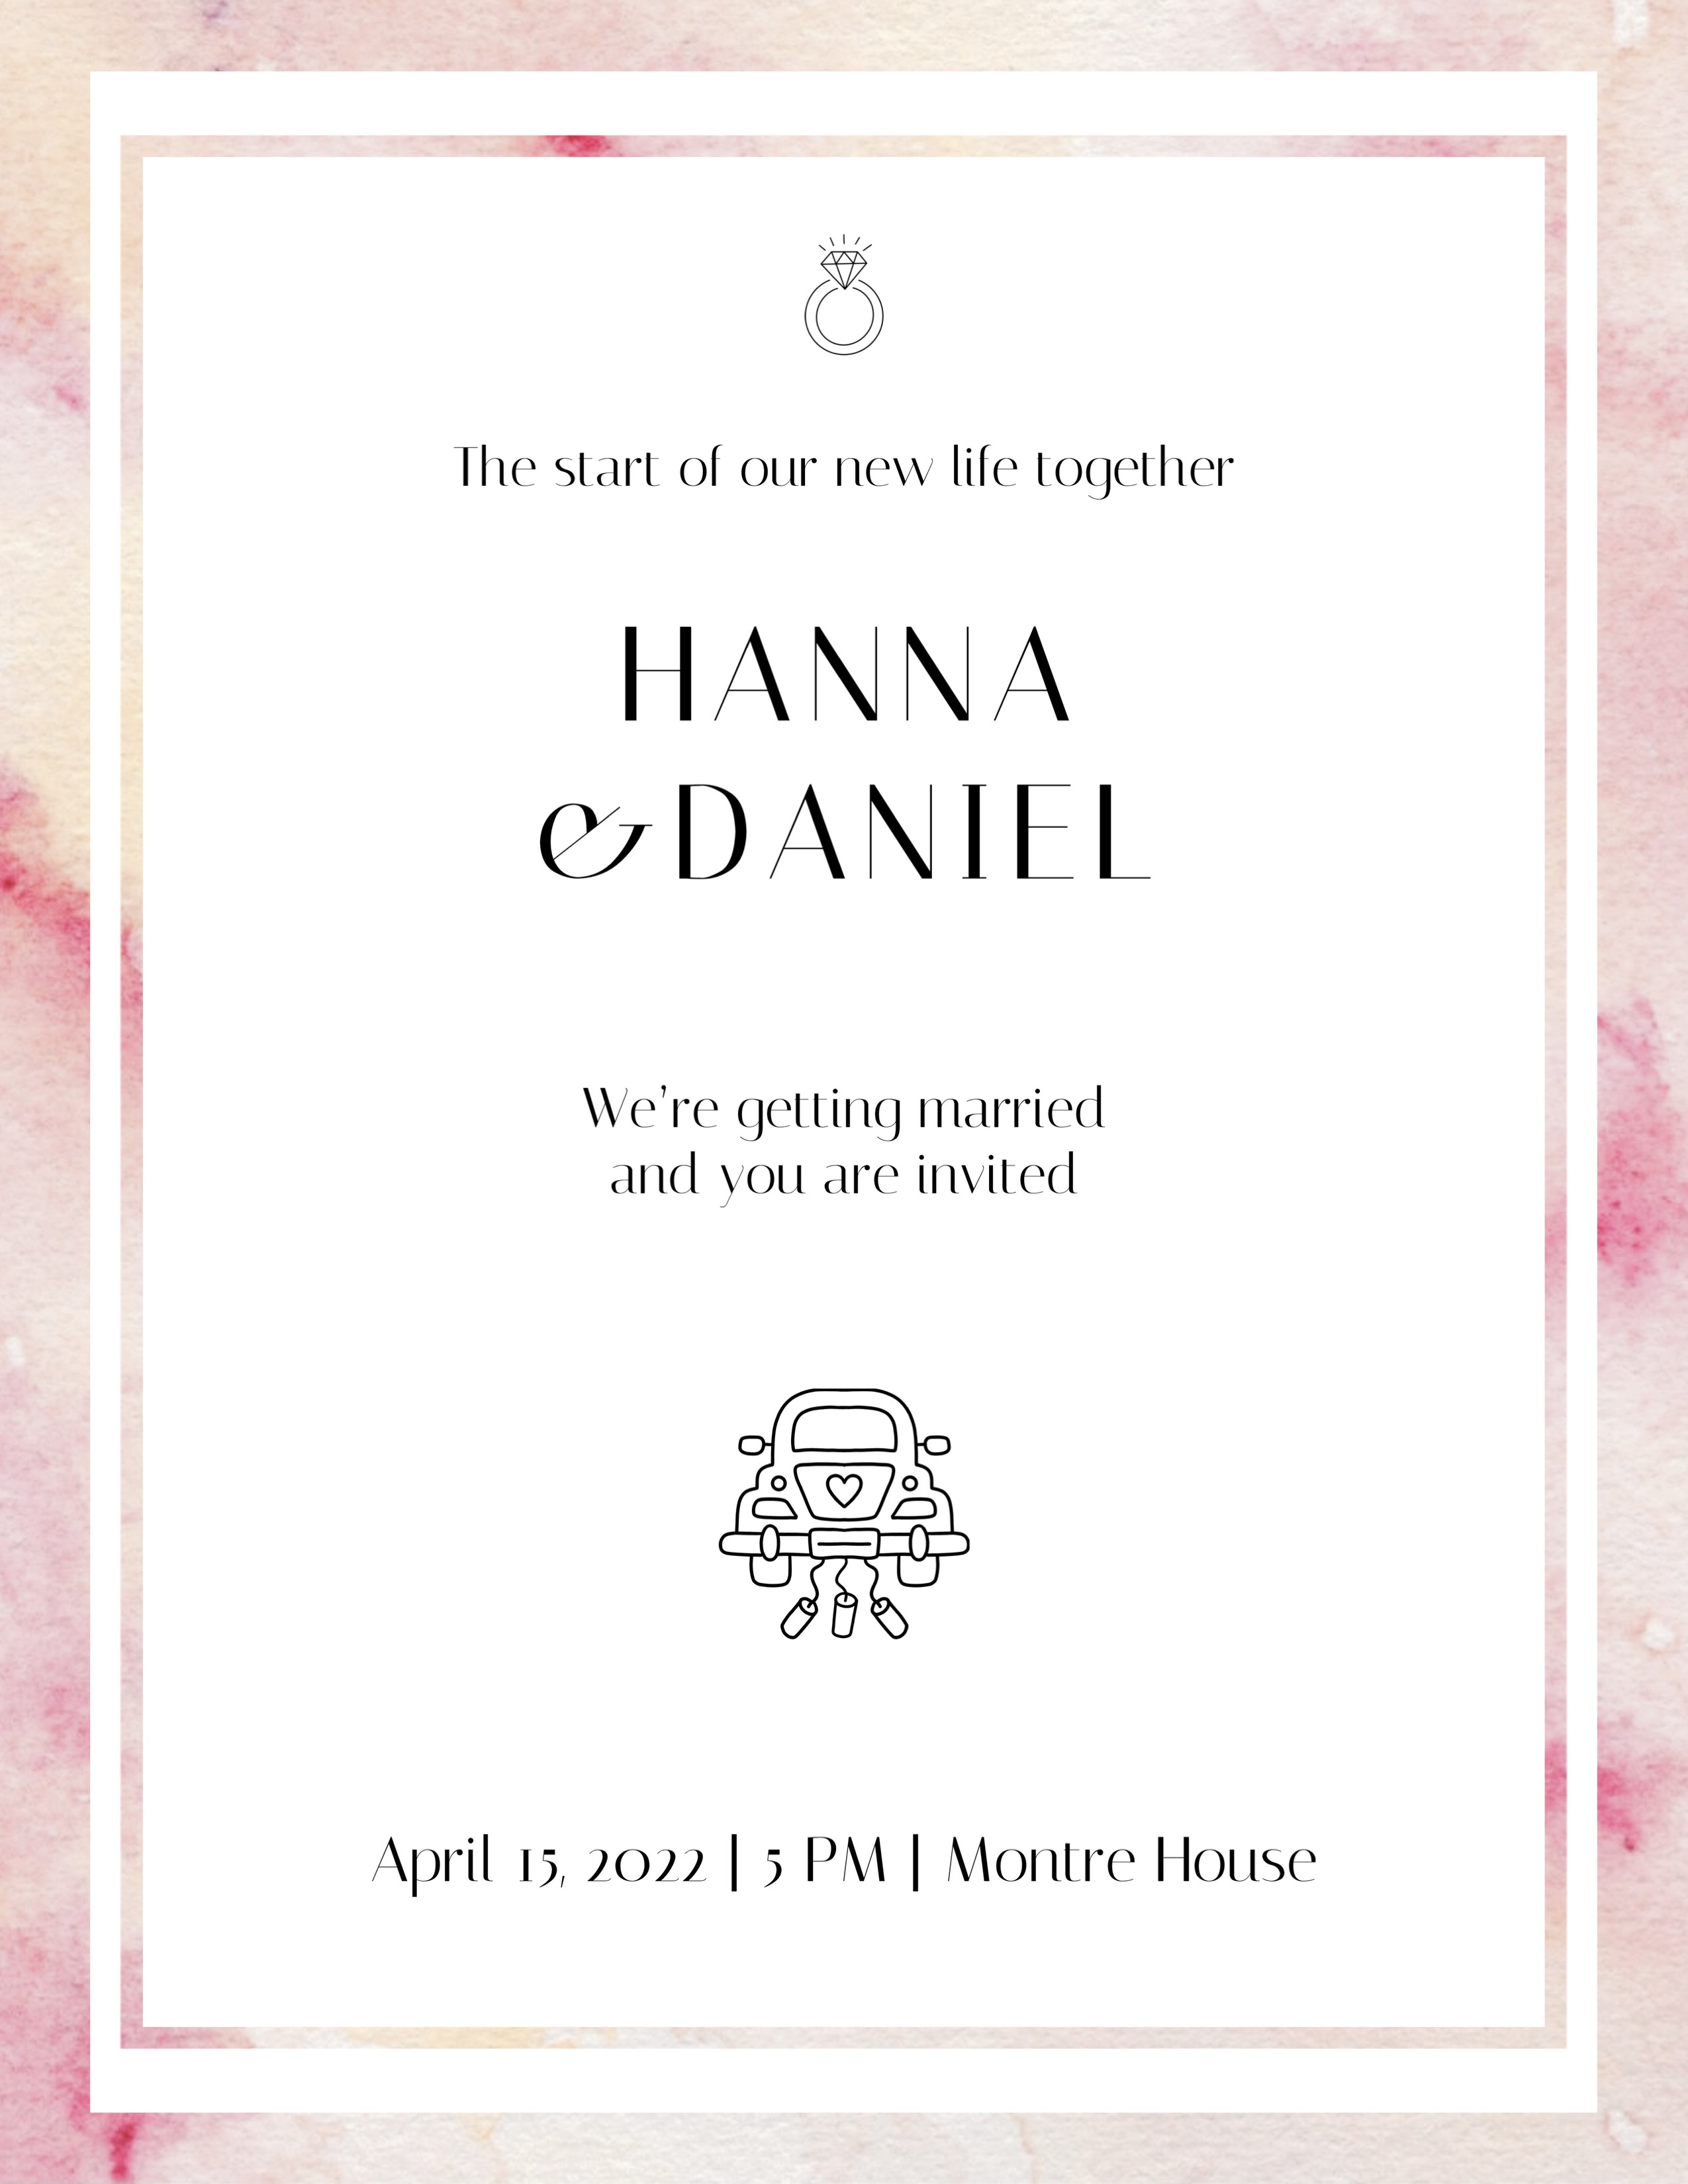 A Wedding Card With A Picture Of A Bride And Groom Wedding Template